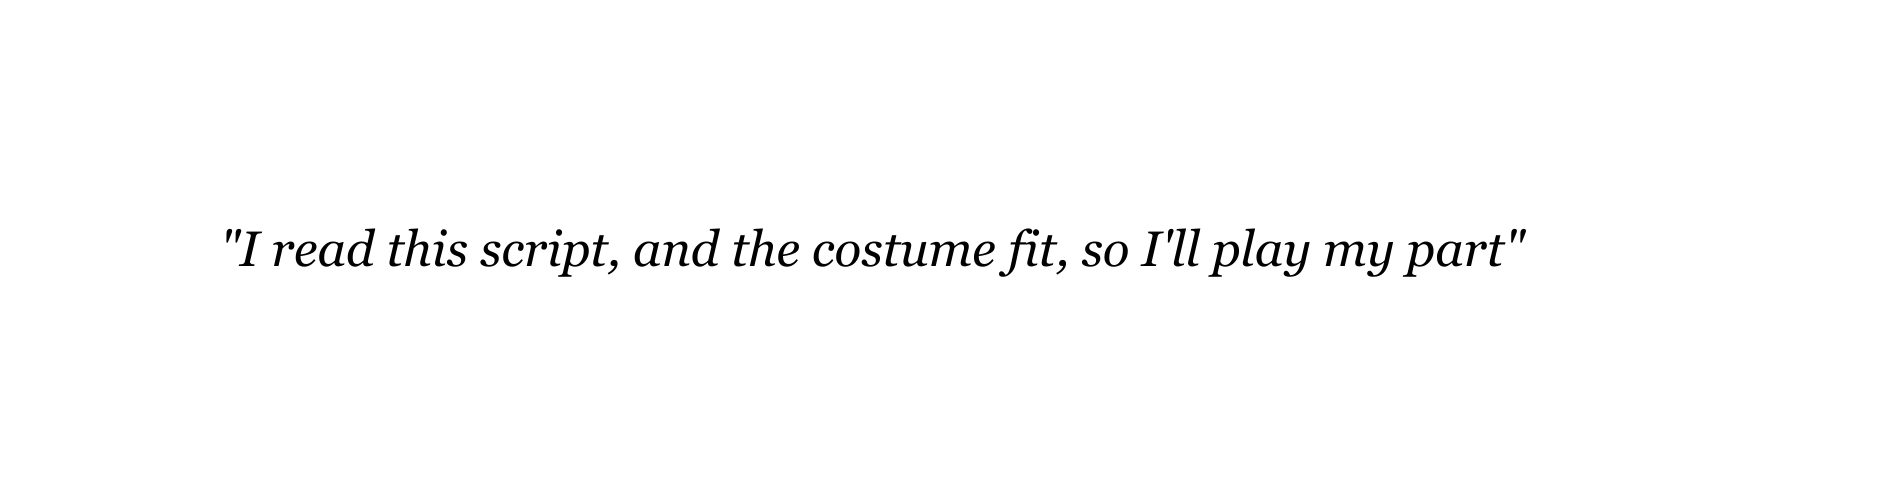 I read this script and the costume fit so I ll play my part